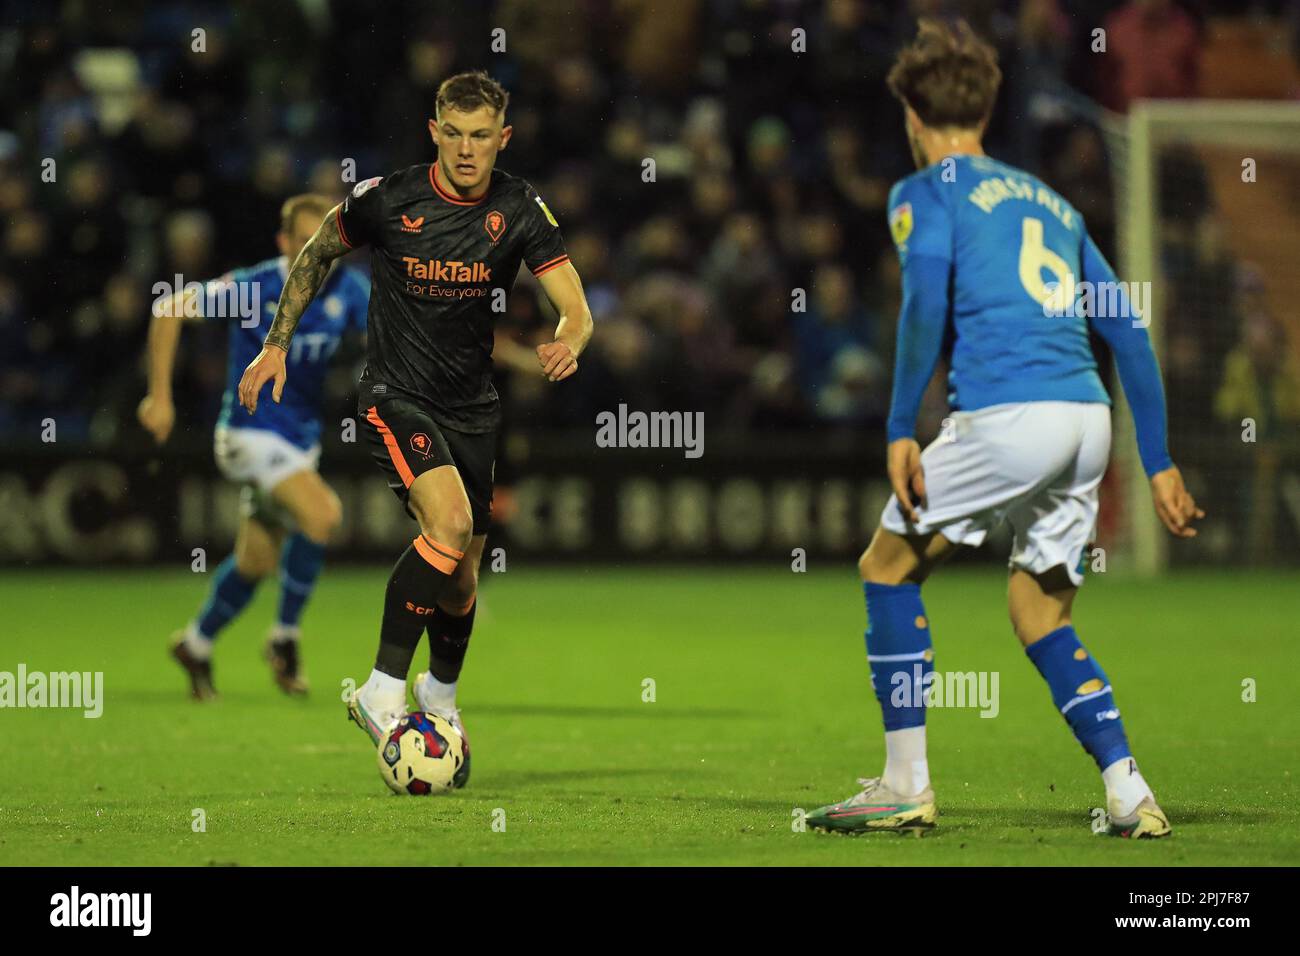 Salfords Callum Hendry charges forward during the Sky Bet League 2 match between Stockport County and Salford City at the Edgeley Park Stadium, Stockport on Friday 31st March 2023. (Photo: Chris Donnelly | MI News) Credit: MI News & Sport /Alamy Live News Stock Photo